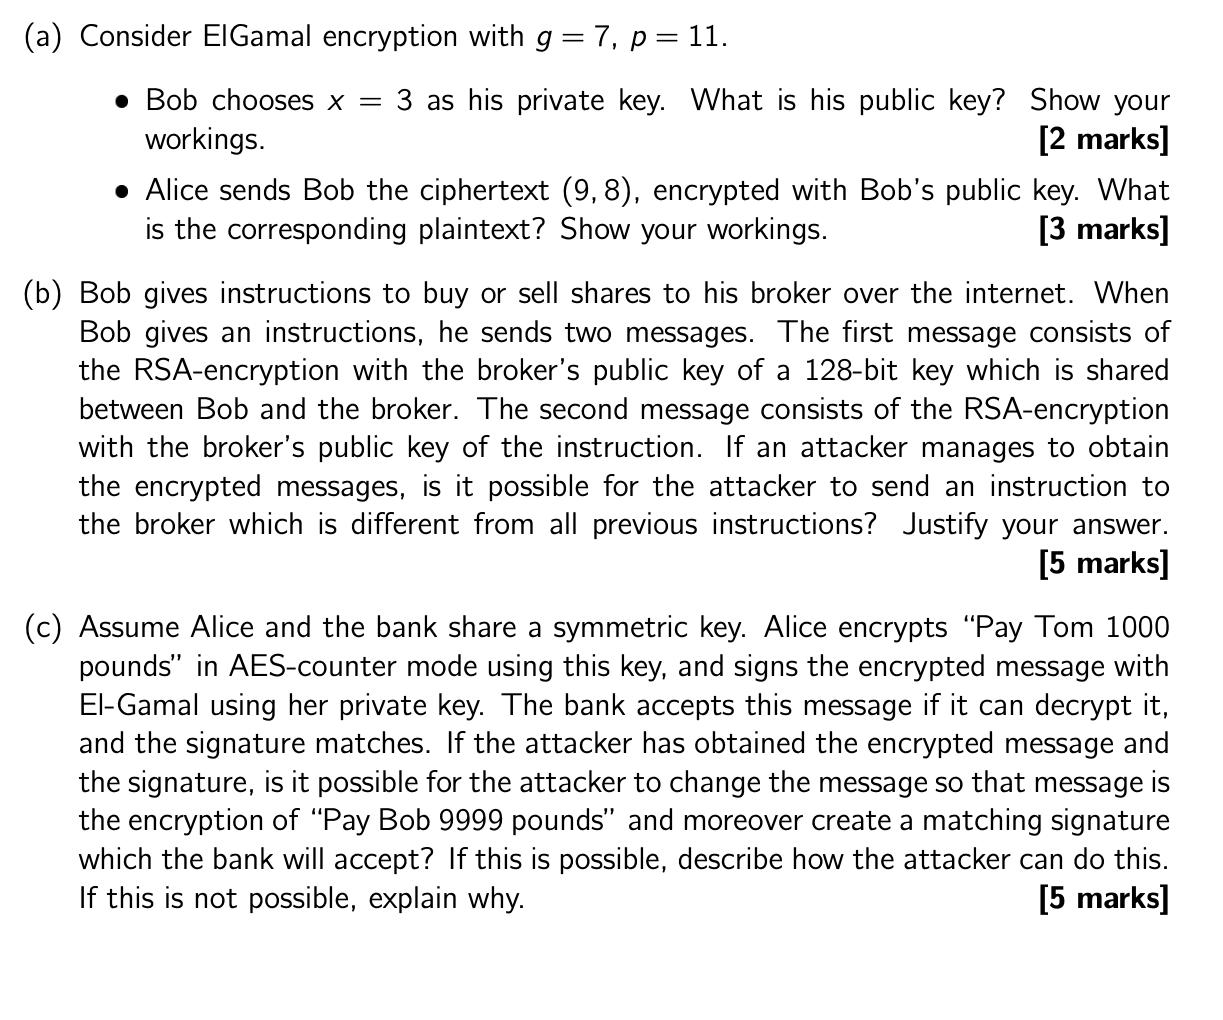 (a) Consider ElGamal encryption with g = 7, p = 11. Bob chooses x = 3 as his private key. What is his public